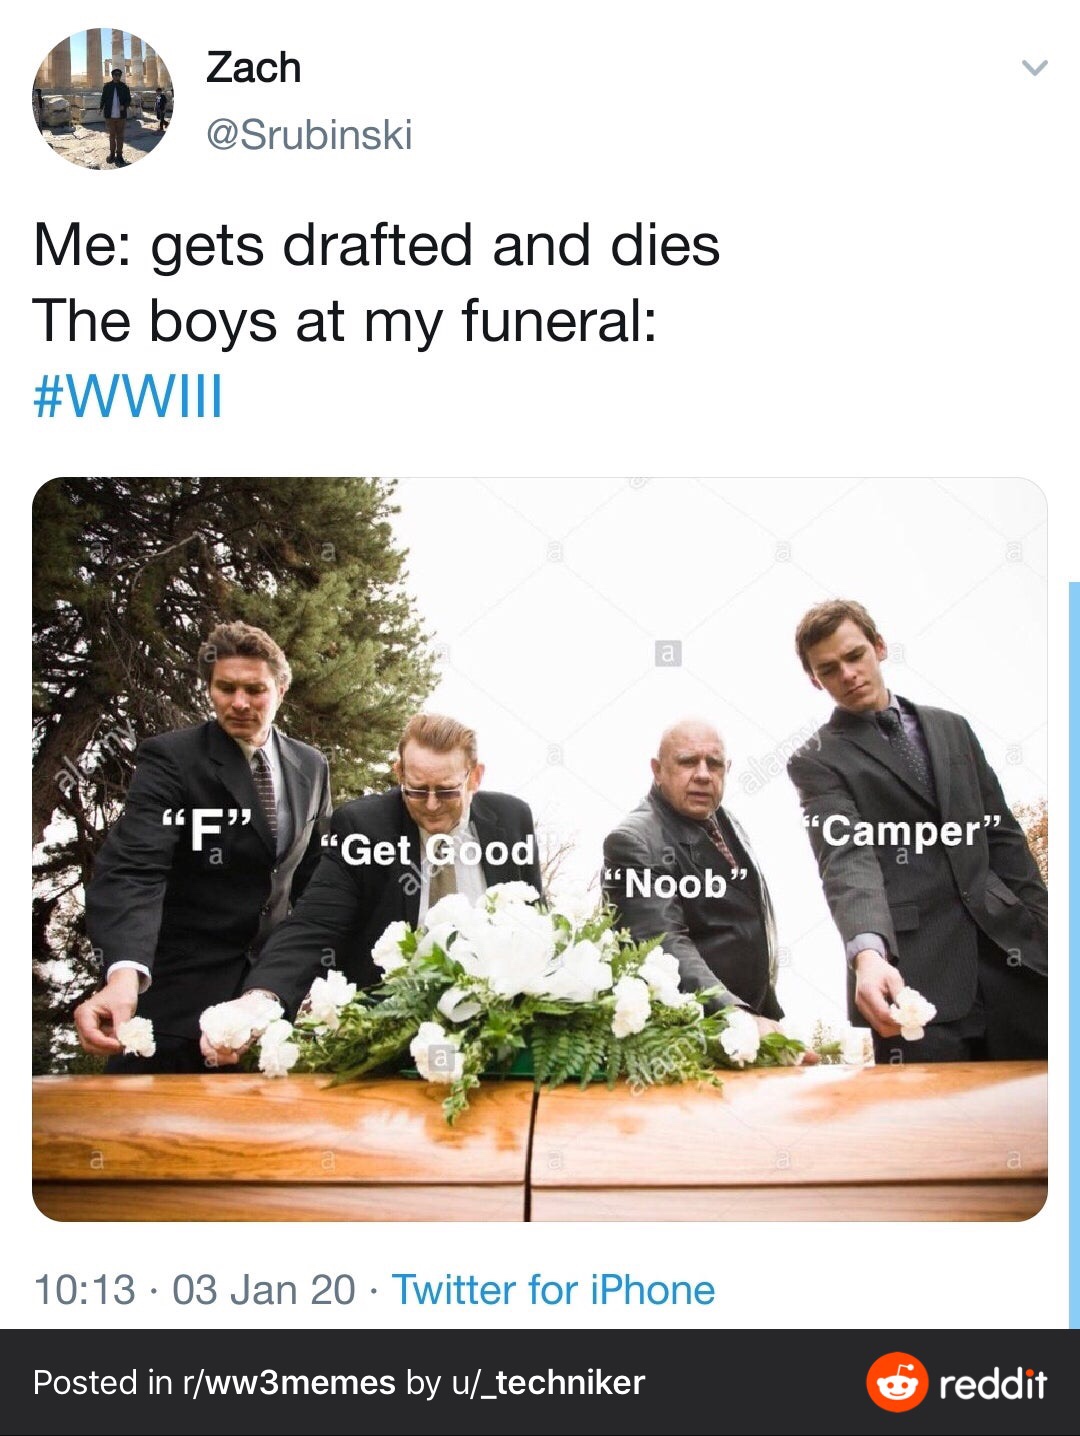 photo caption - Chea Stubinski Zach Me gets drafted and dies The boys at my funeral Get Good Camper "Noob" 03 Jan 20 Twitter for iPhone Posted in ww3memes by u_techniker reddit